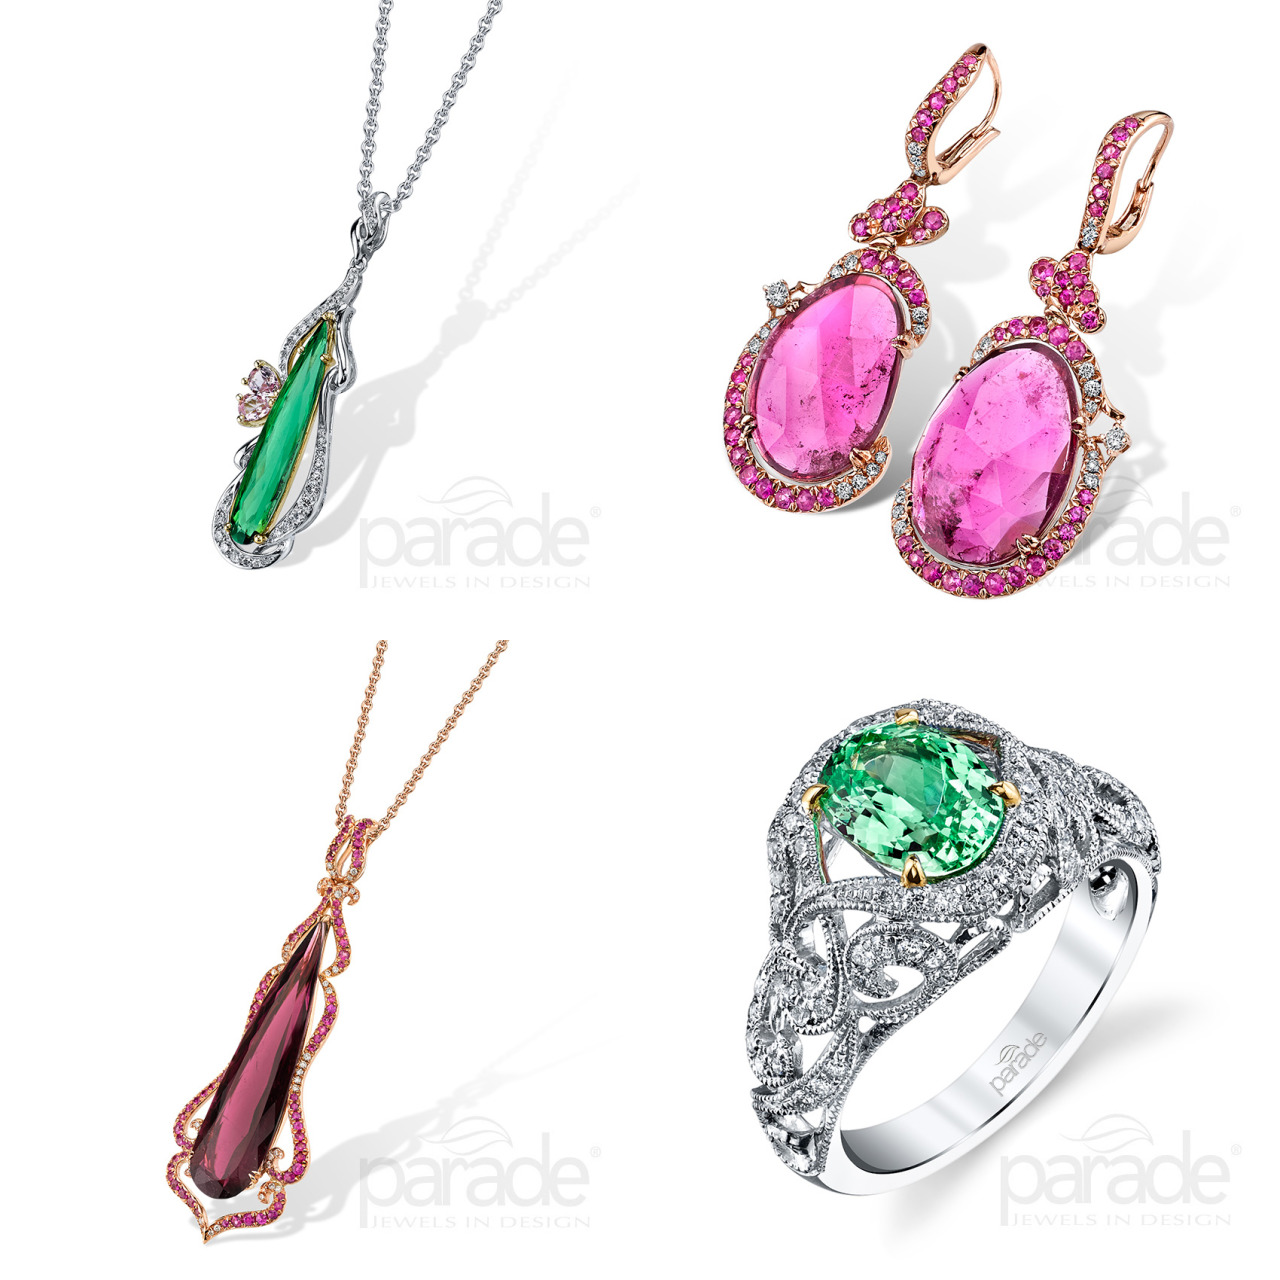 Parade in Color shines in National Jeweler’s Gemstone Spotlight!</p><br /><br /><br /><br /><br /><br /><br /><br /><br /><br /><br /><br /><br /><br /><br />
<p>The stones tell the story - Inspiration rises from hand-selected colored gemstones, emphasizing and celebrating the extraordinary.   Parade’s new styles showcase vivid slices and cuts of precious stones enlivened with sparkling accent gems; these unique creations present a dynamic combination for a dramatic and luxurious look.</p><br /><br /><br /><br /><br /><br /><br /><br /><br /><br /><br /><br /><br /><br /><br />
<p>